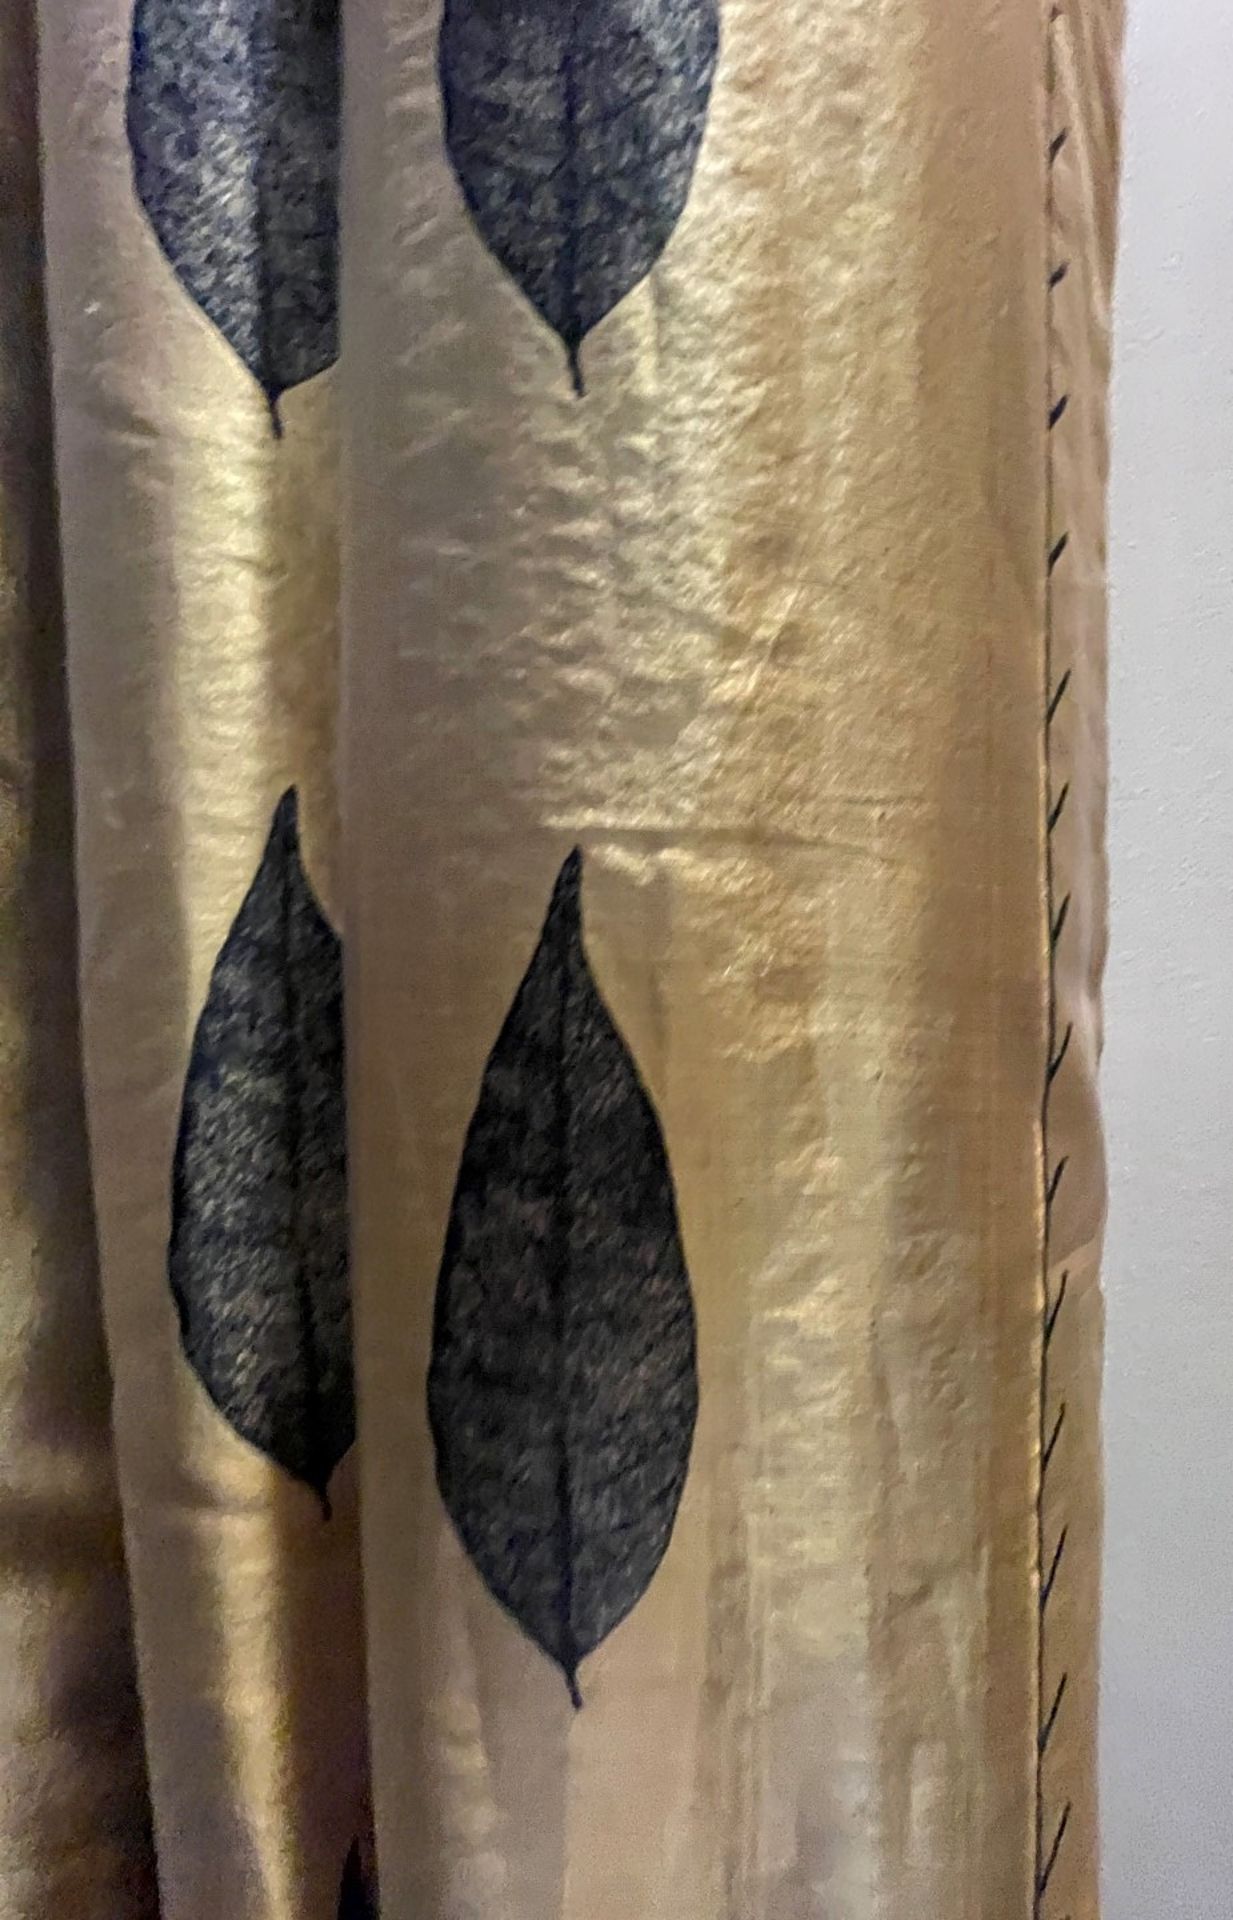 3 x Sets Of Bespoke Premium Quality Lined Curtains In Gold With A Leaf Design - 285cm Drop - Image 13 of 20